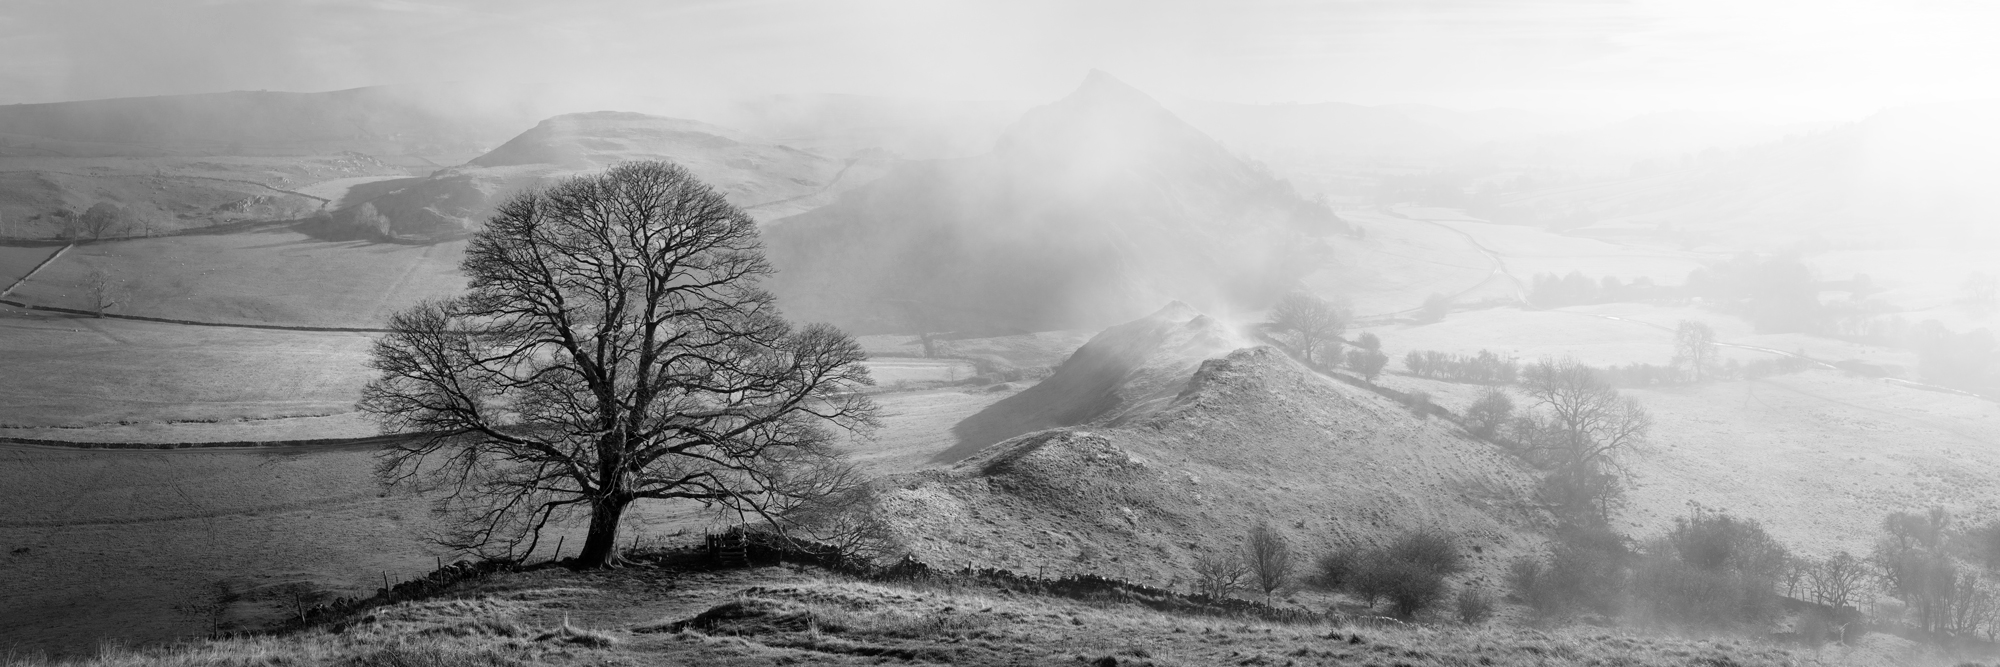 Panoramic b&w print of Chrome and Parkhouse Hill in the Peak District